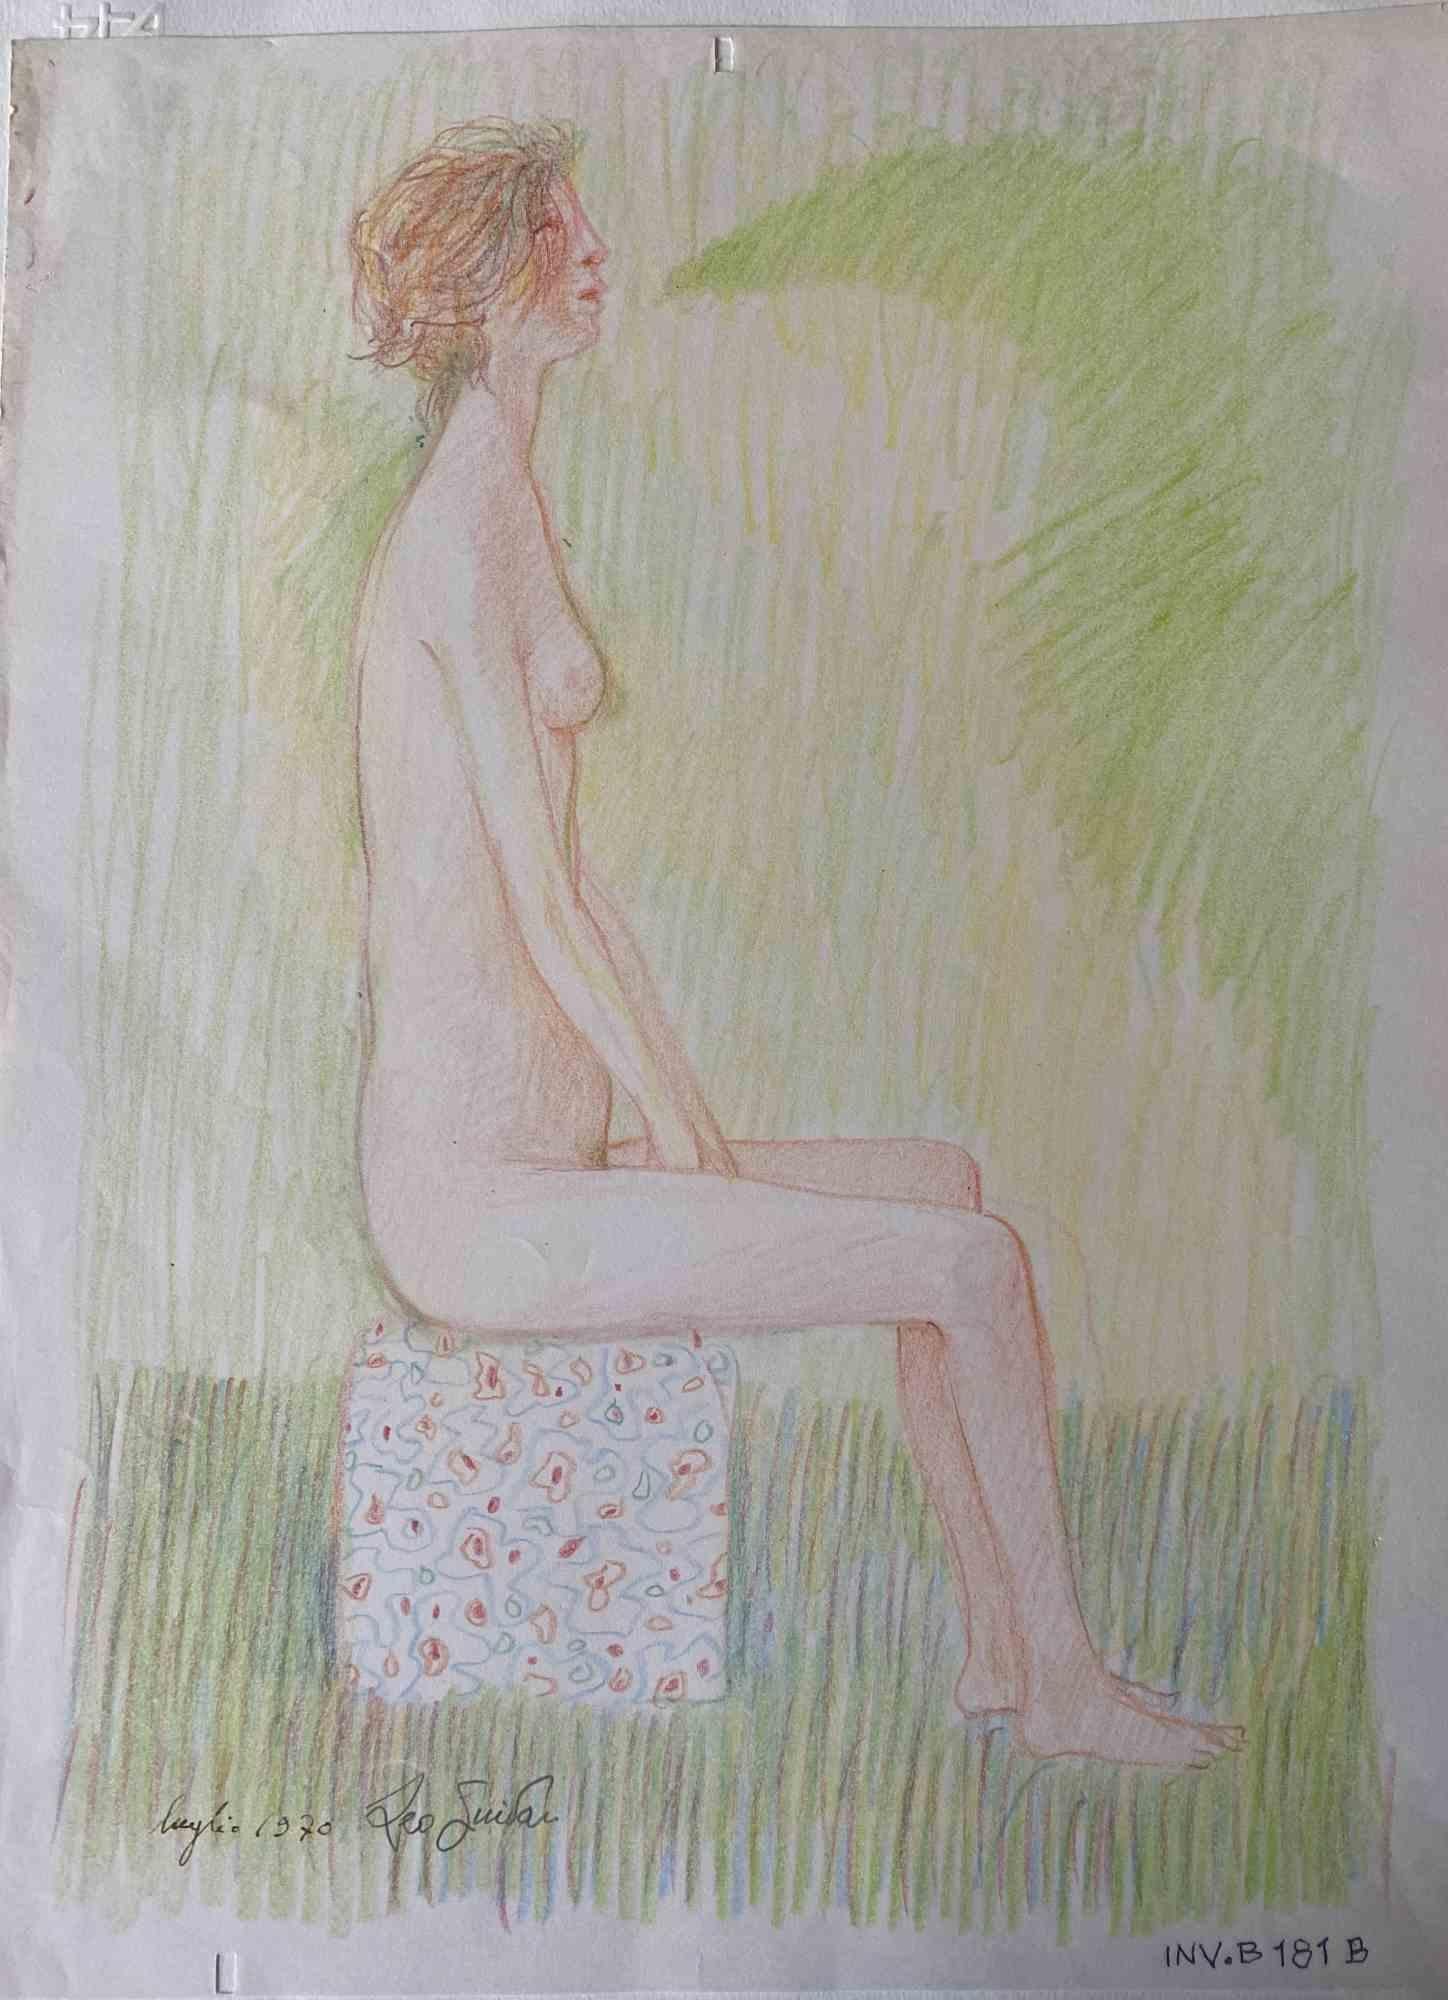 Nude is an original Contemporary artwork realized in 1970 by the italian Contemporary artist  Leo Guida  (1992 - 2017).

Original drawing in colored pencil on ivory-colored paper, glued on cardboard (50 x 35 cm)

Hand-signed and dated on the lower